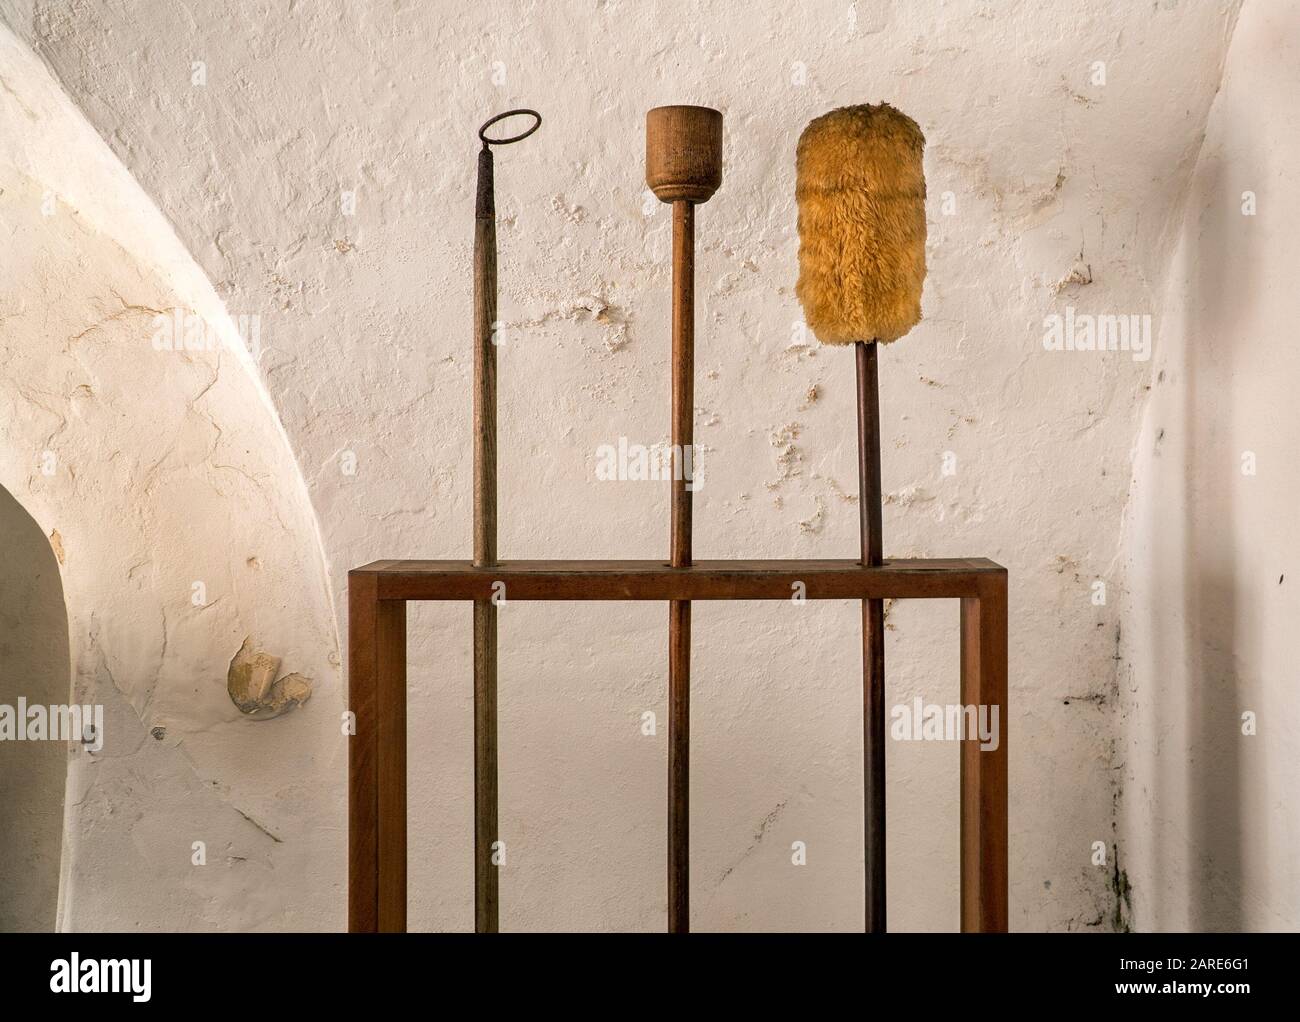 Cannon Tools on display. Tool on the right is a sponge rammer Stock Photo -  Alamy